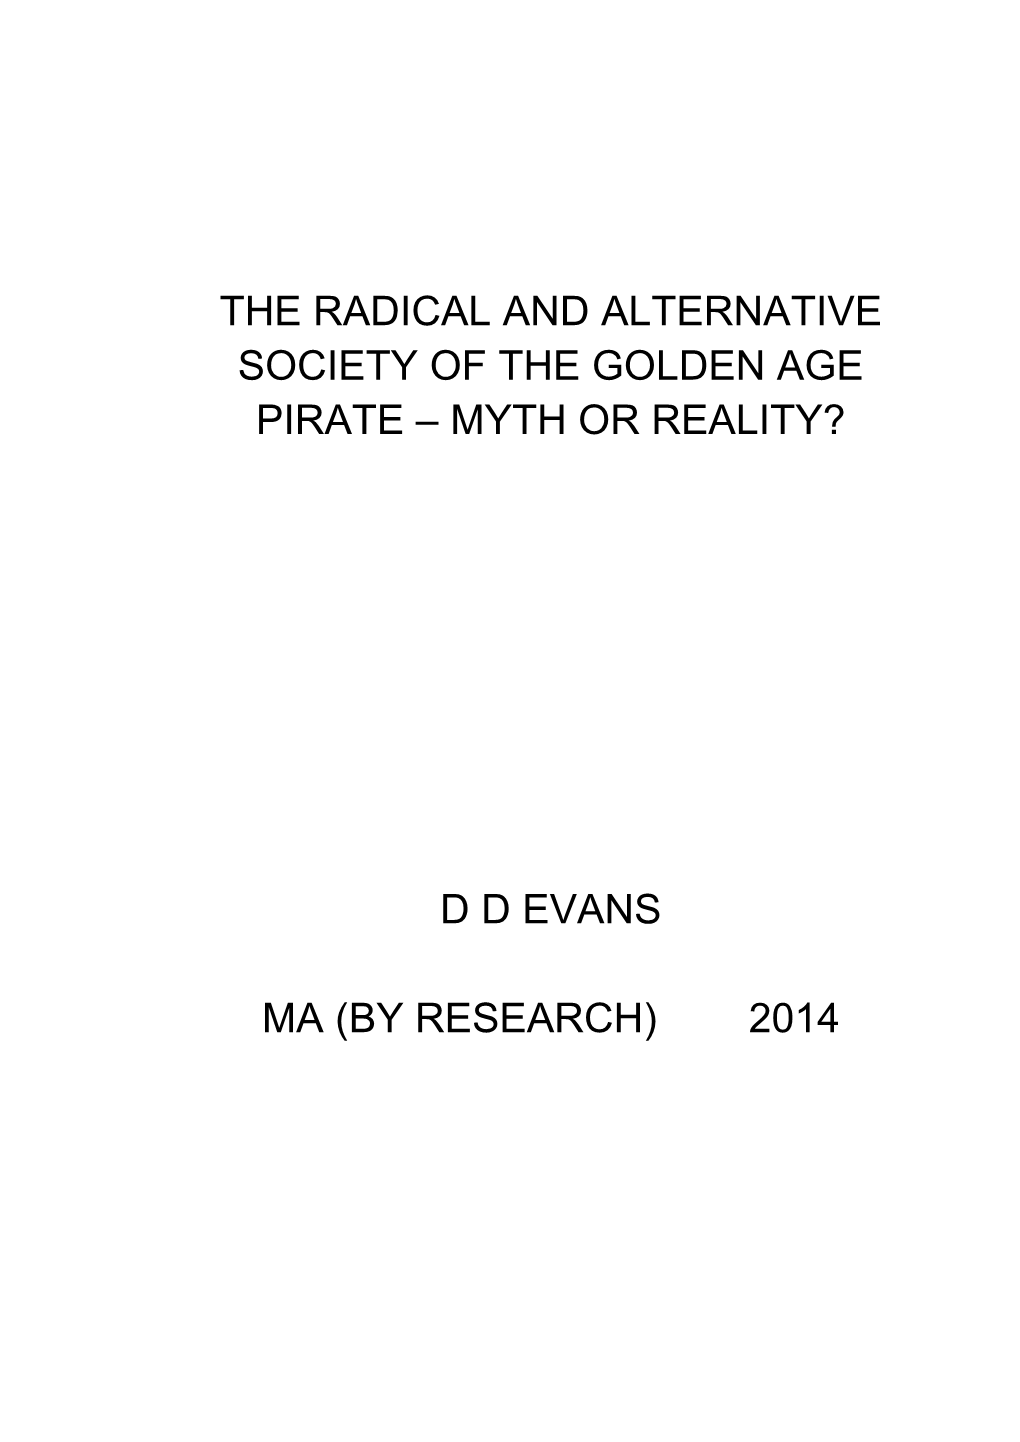 The Radical and Alternative Society of the Golden Age Pirate – Myth Or Reality?